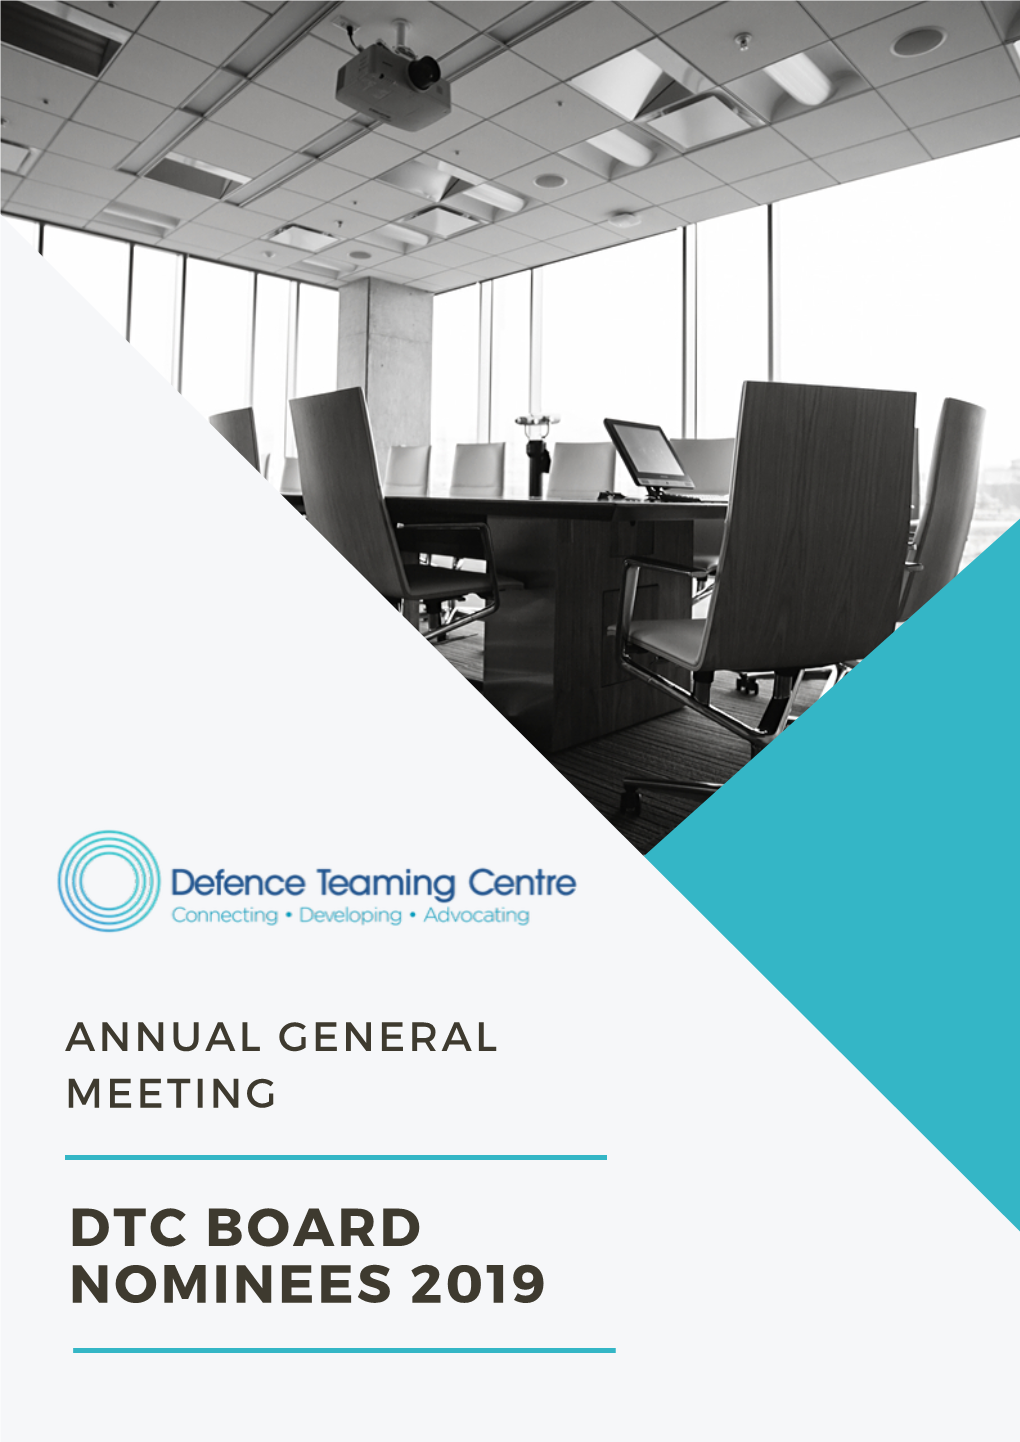 Dtc Board Nominees 2019 the Defence Teaming Centre's 2019 Agm Will Be Held on 5 November 2019